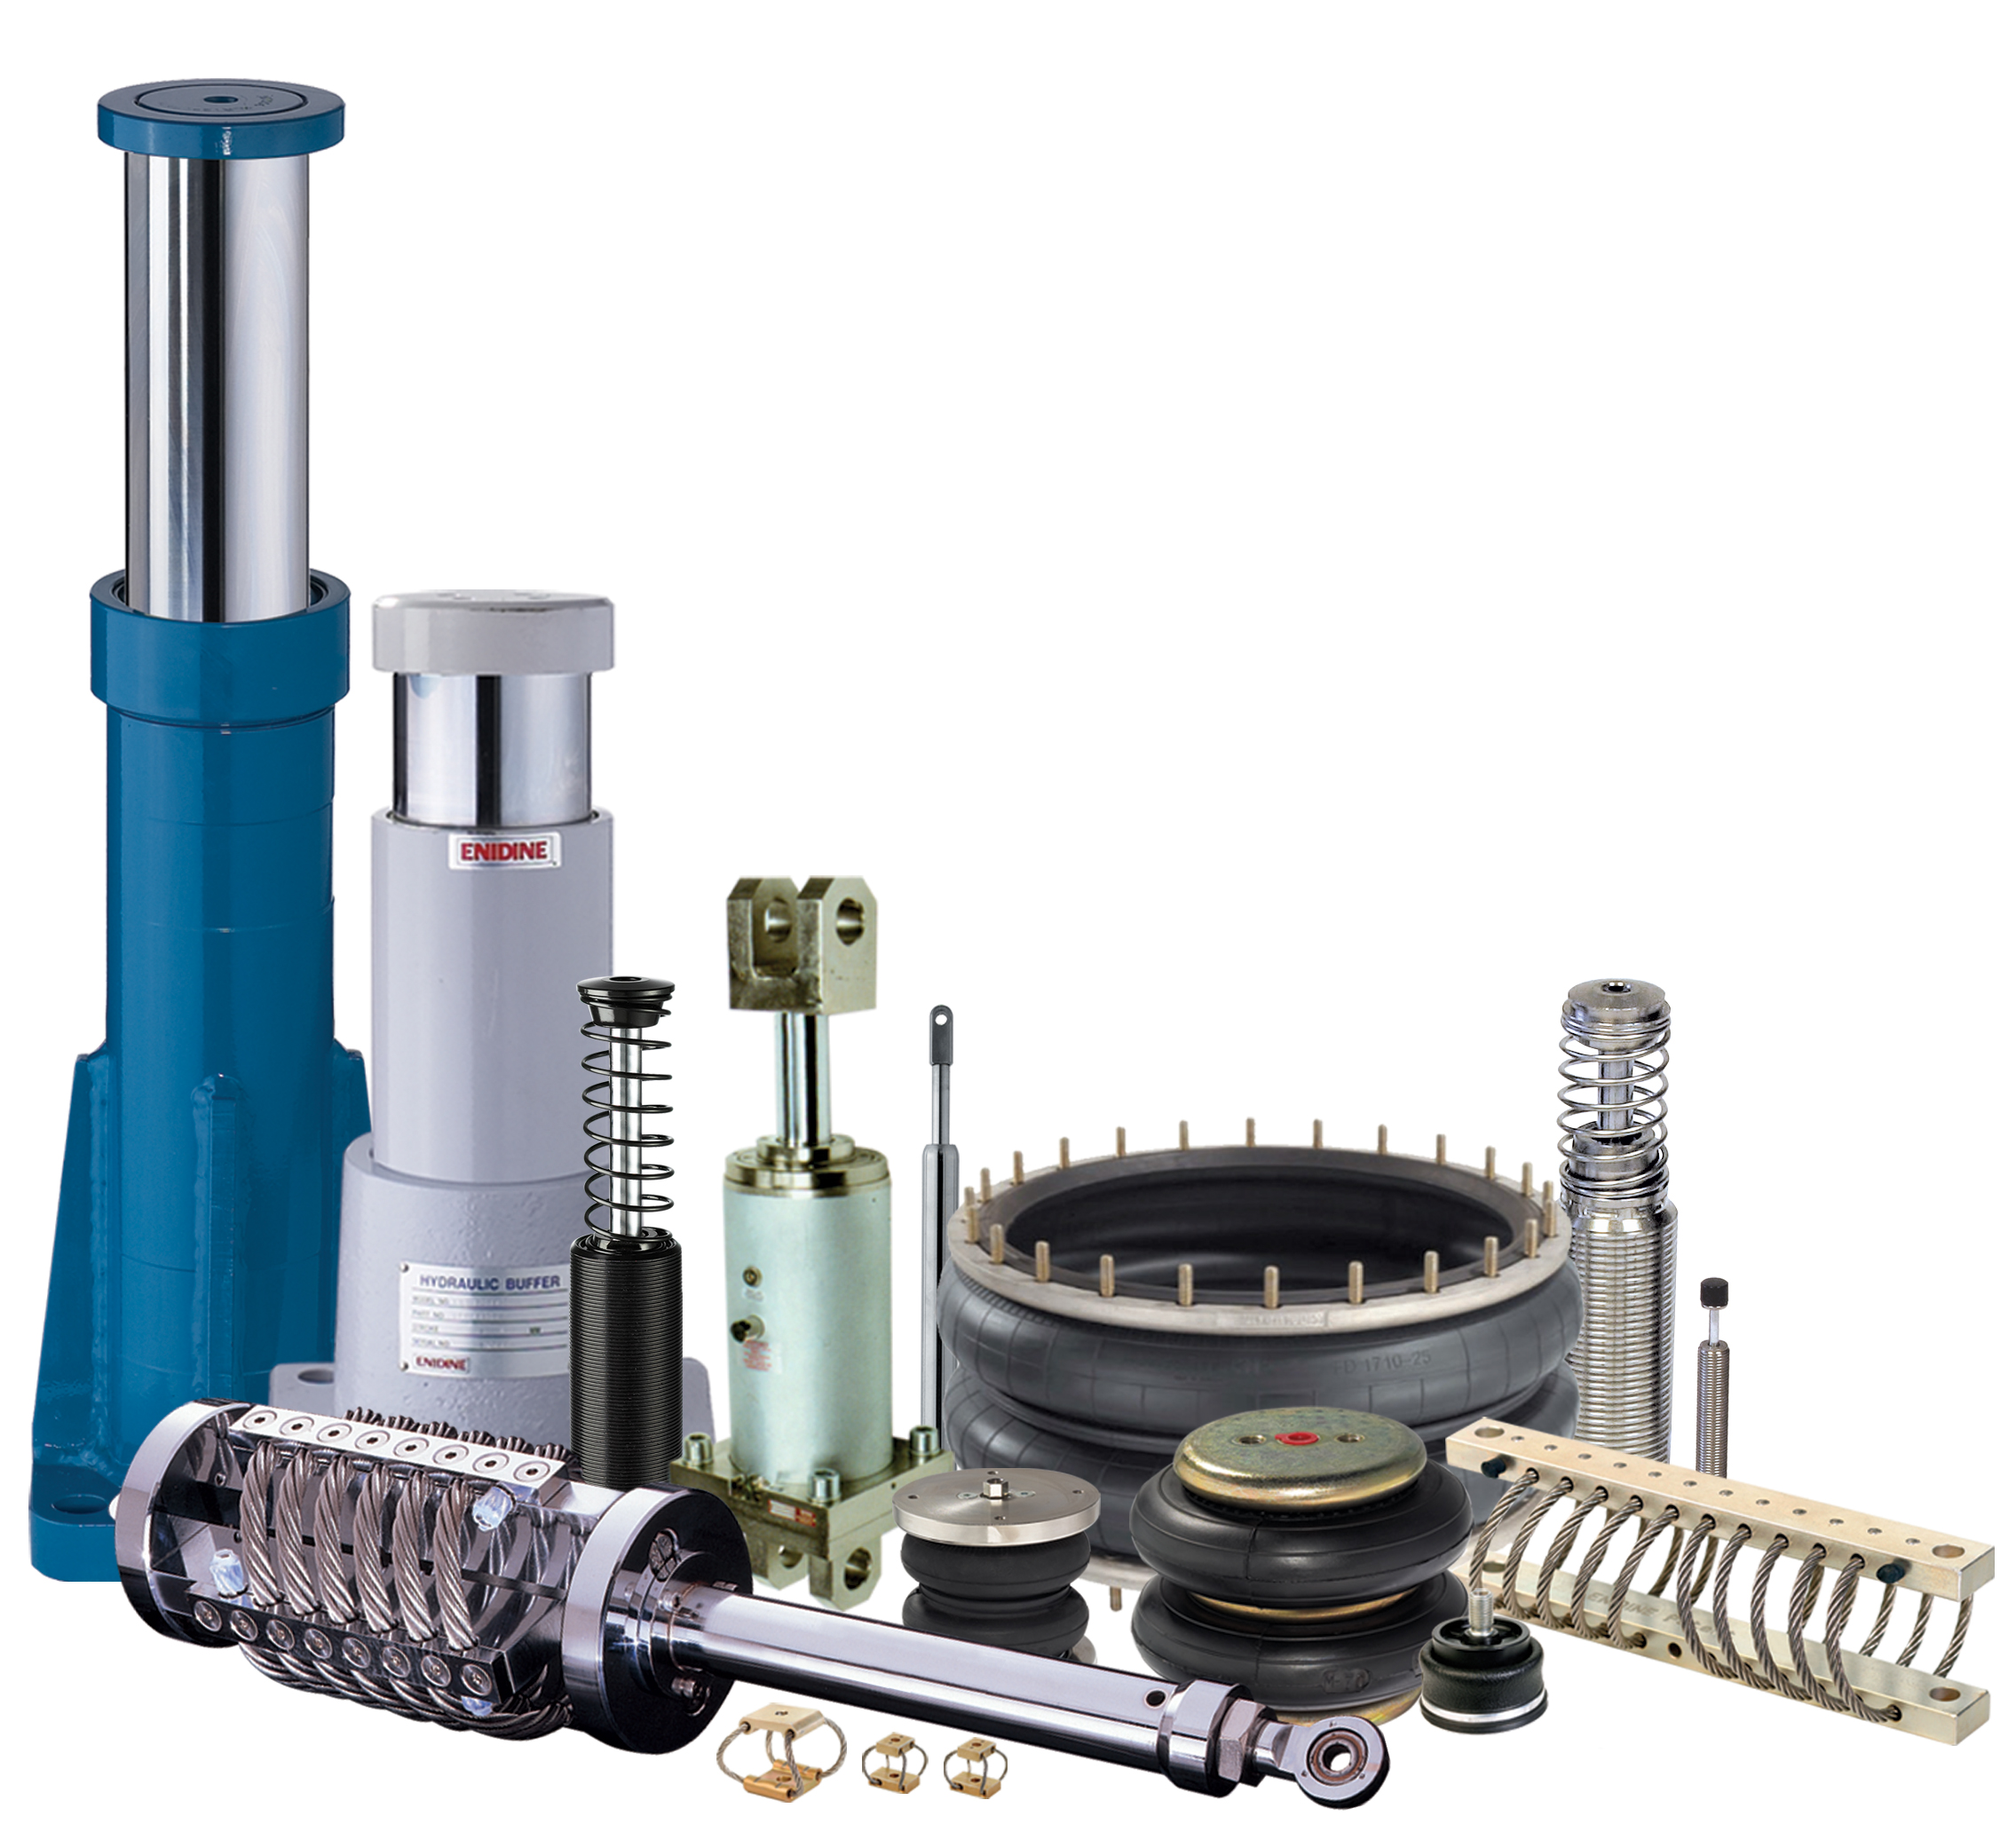 Vibration and shock attenuation components can be comprised of shock absorbers, linear dampers, wire rope or spring isolators, elastomeric isolators, air springs, or structural damping treatments. Photo courtesy of ITT Enidine.